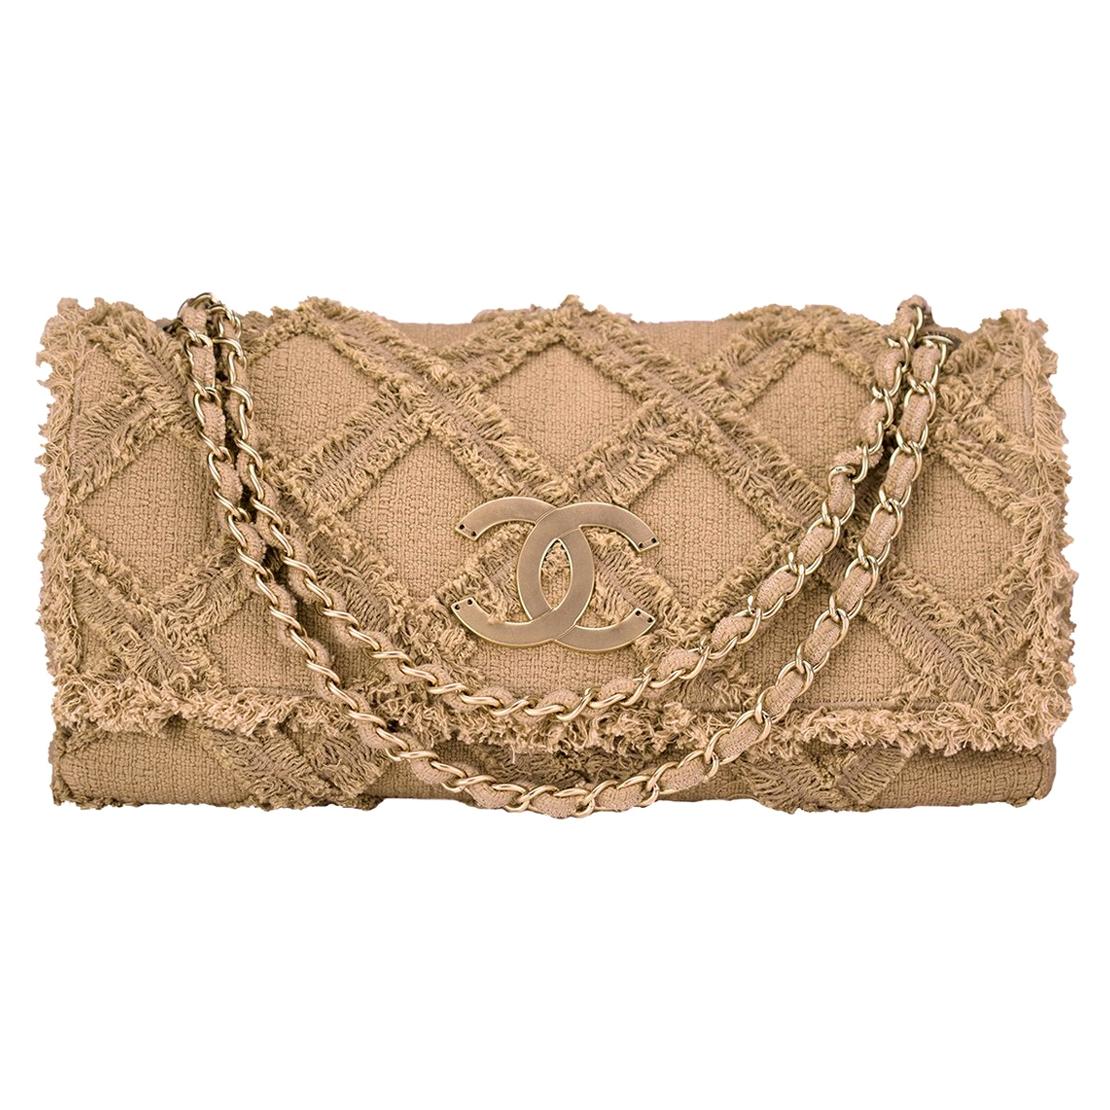 Chanel Limited Edition Crochet Nature Tweed Extra Large Flap Bag